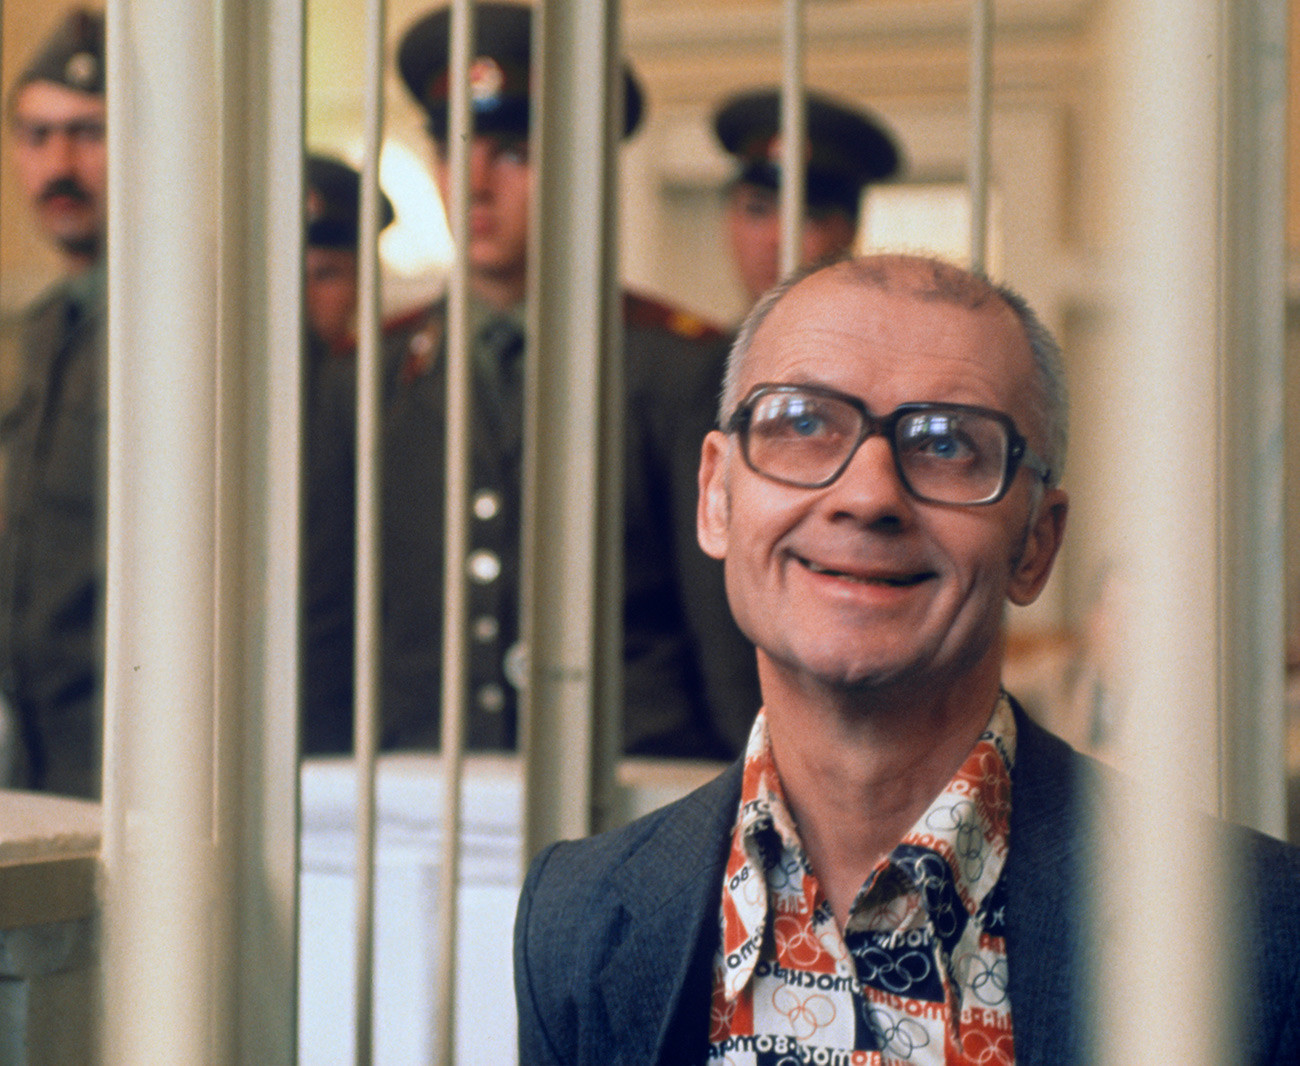 Andrei Chikatilo, one of the most infamous Russian serial killers, was executed in February 1994 - one of the last executions in Russia. 